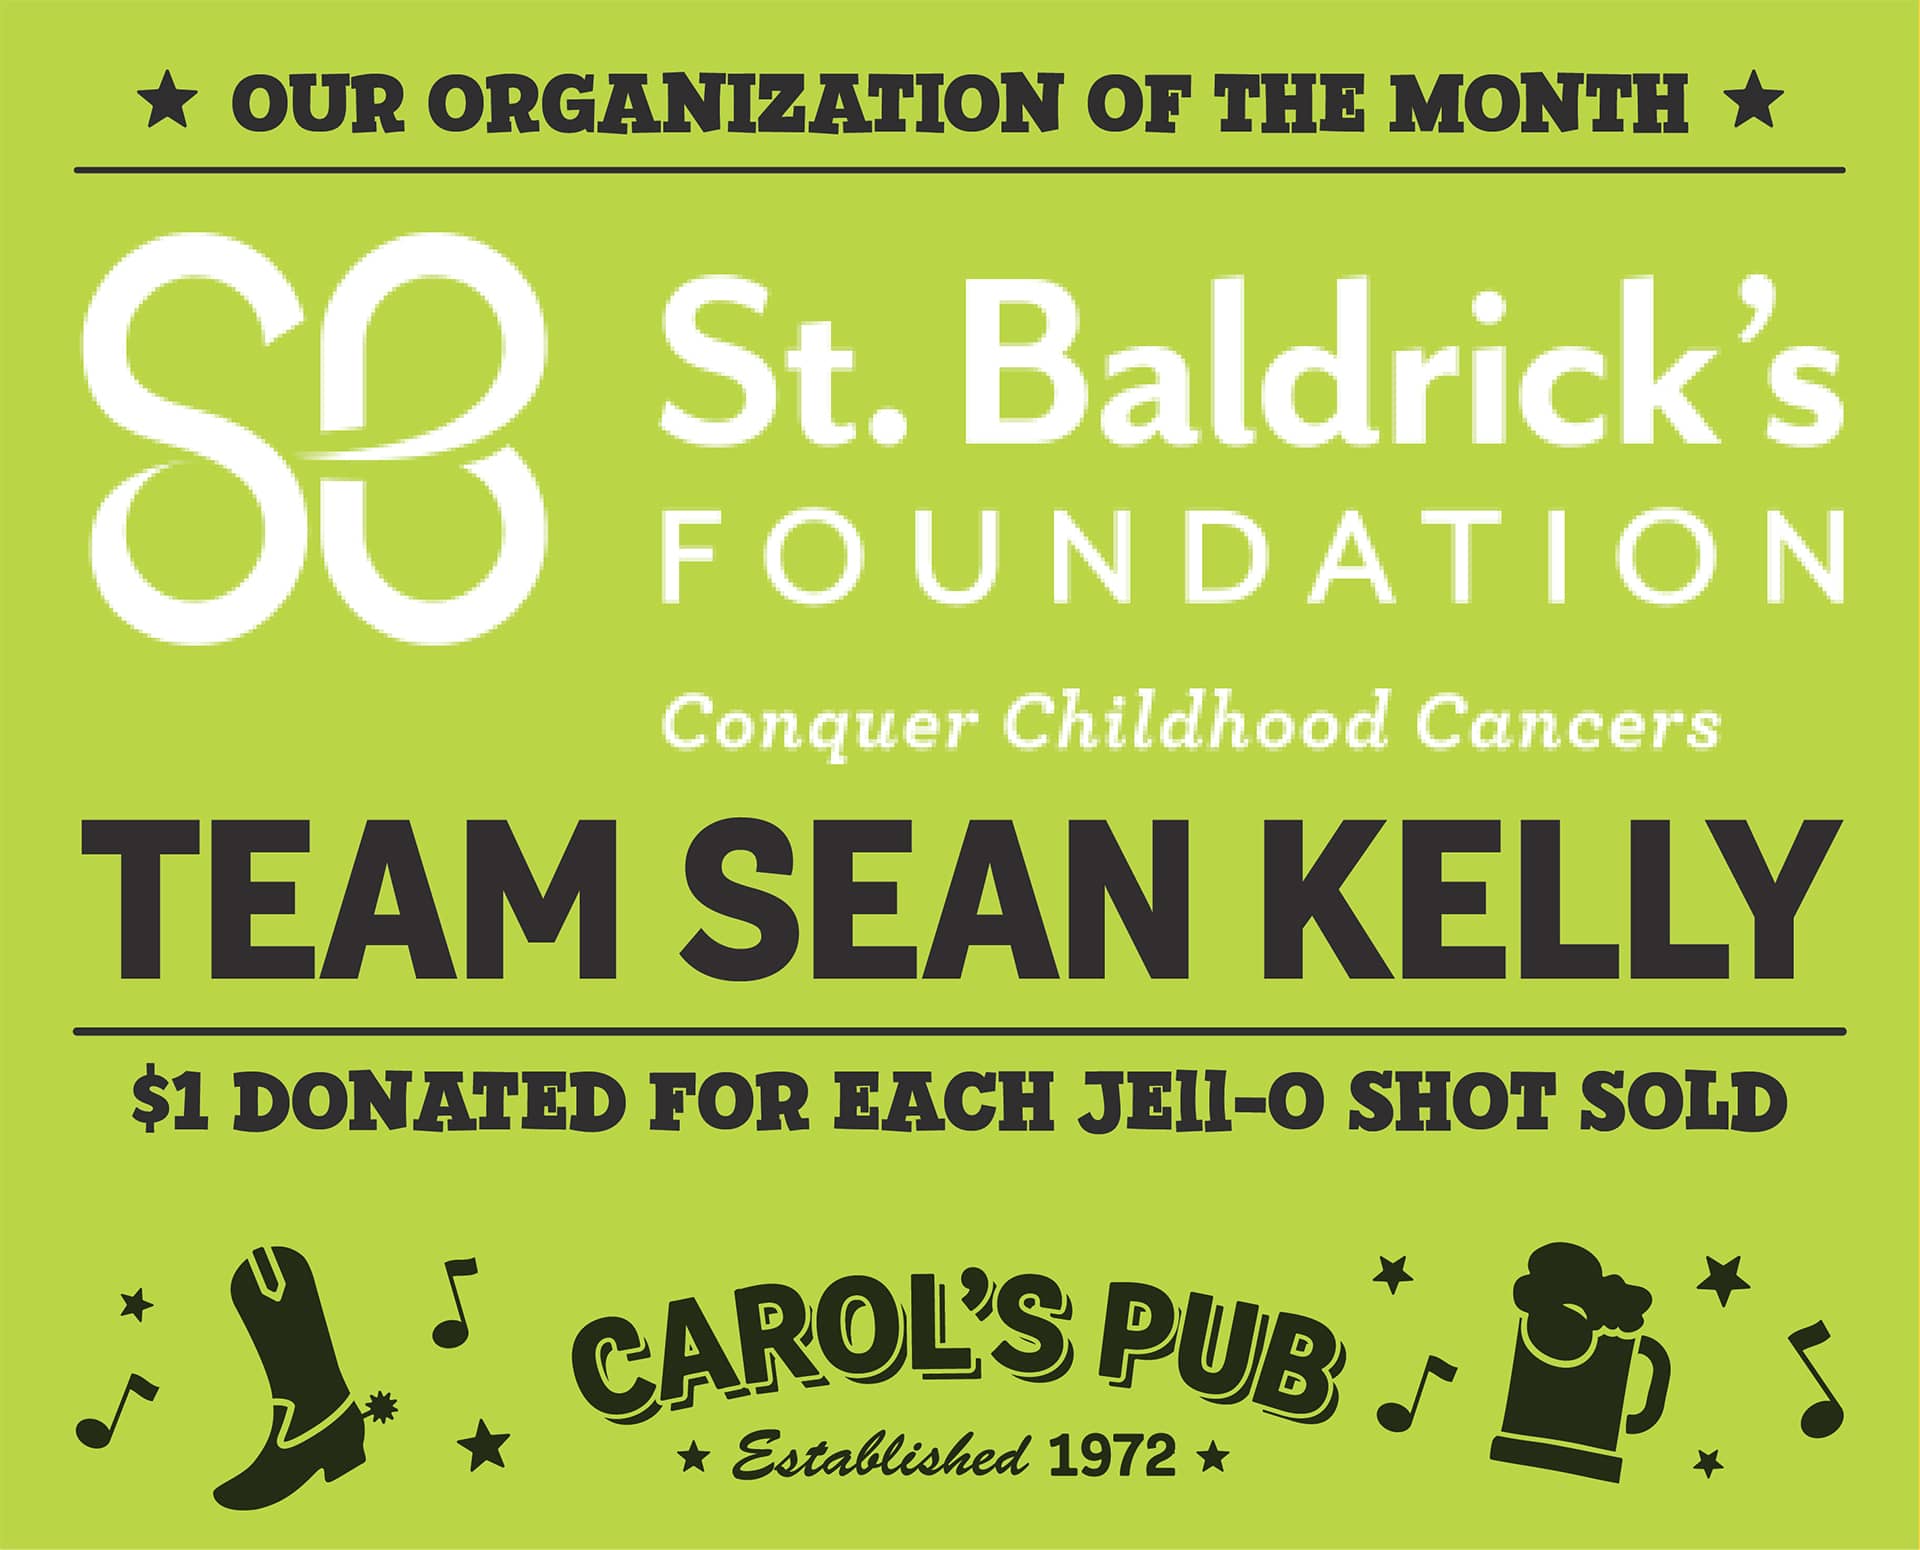 Poster for St. Baldrick's Foundation Team Sean Kelly, March's Organization of the Month